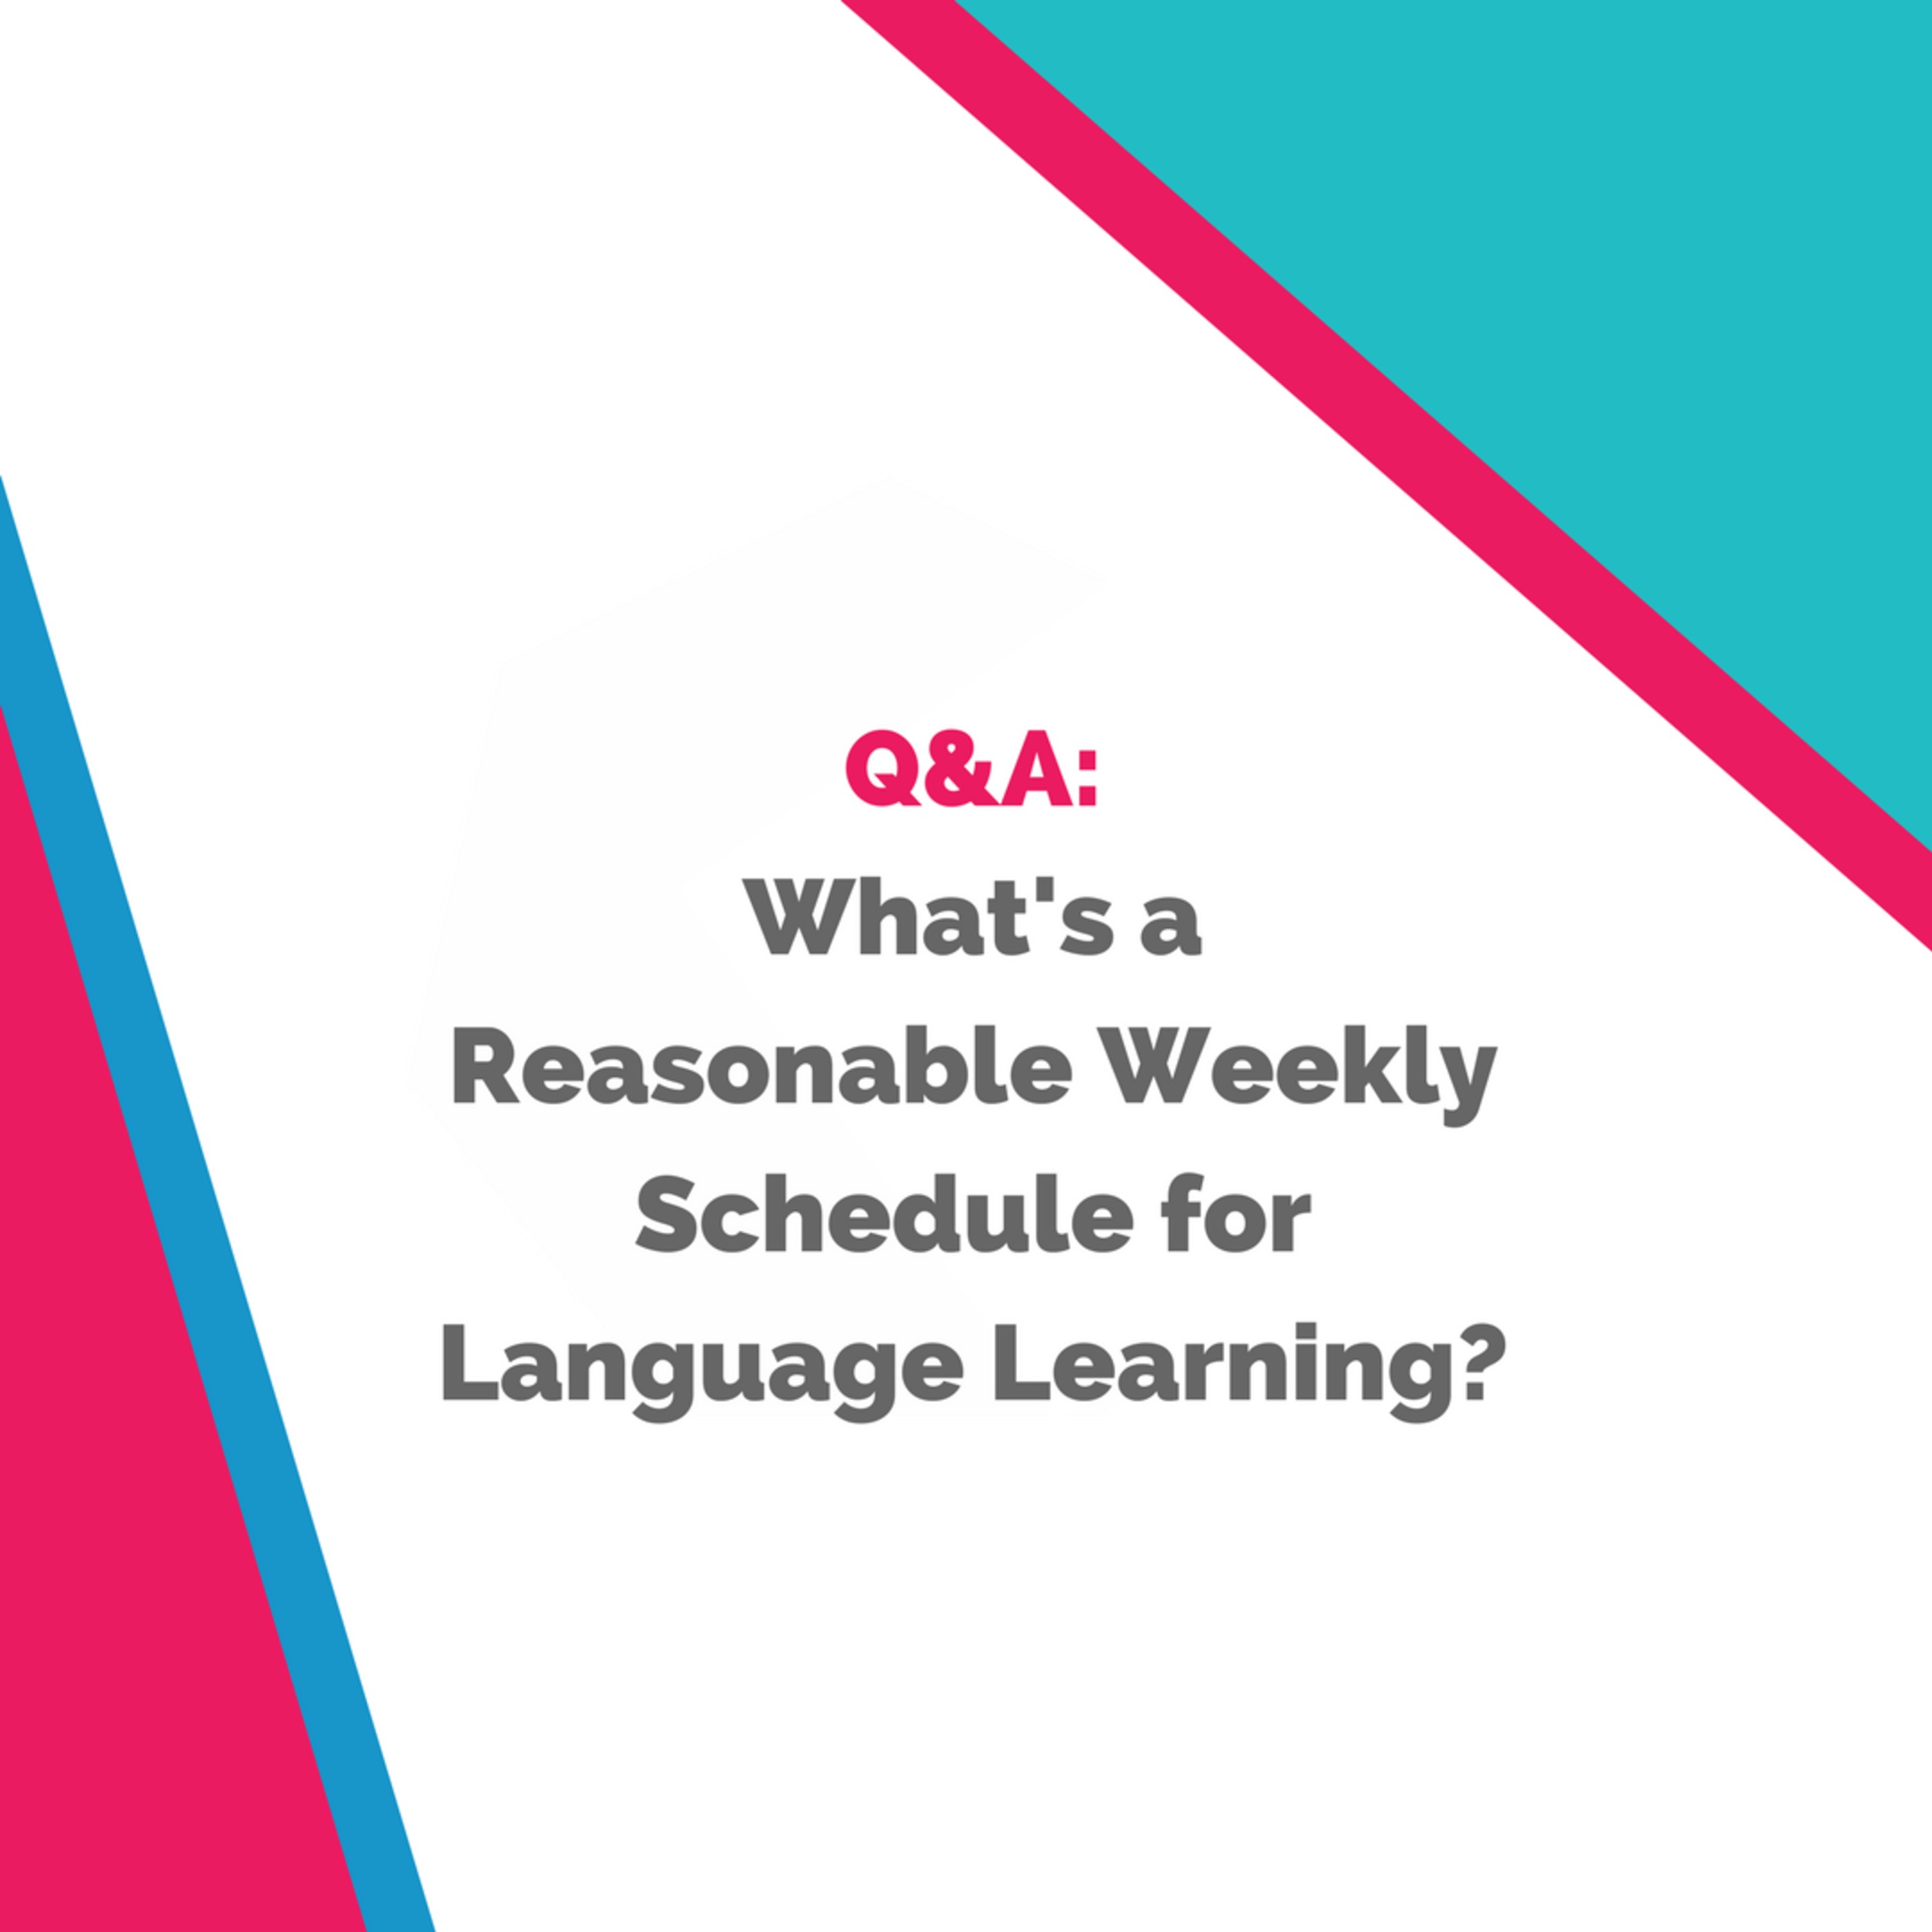 Q&A: What’s a Reasonable Weekly Schedule for Language Learning?